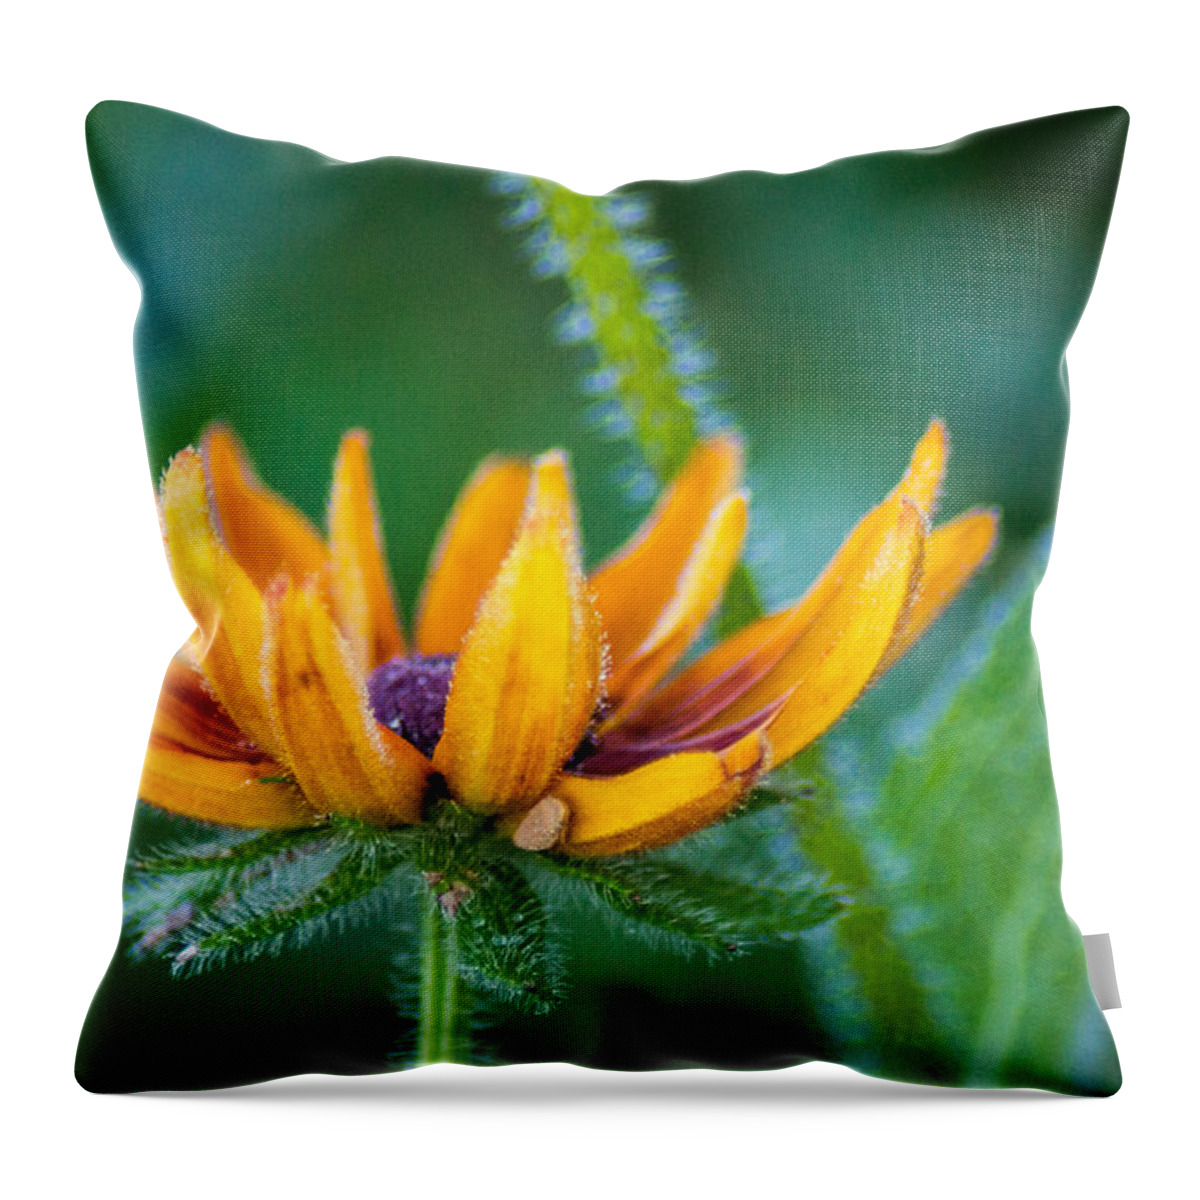 Wildflower Throw Pillow featuring the photograph Floral Fuzz by Bill Pevlor